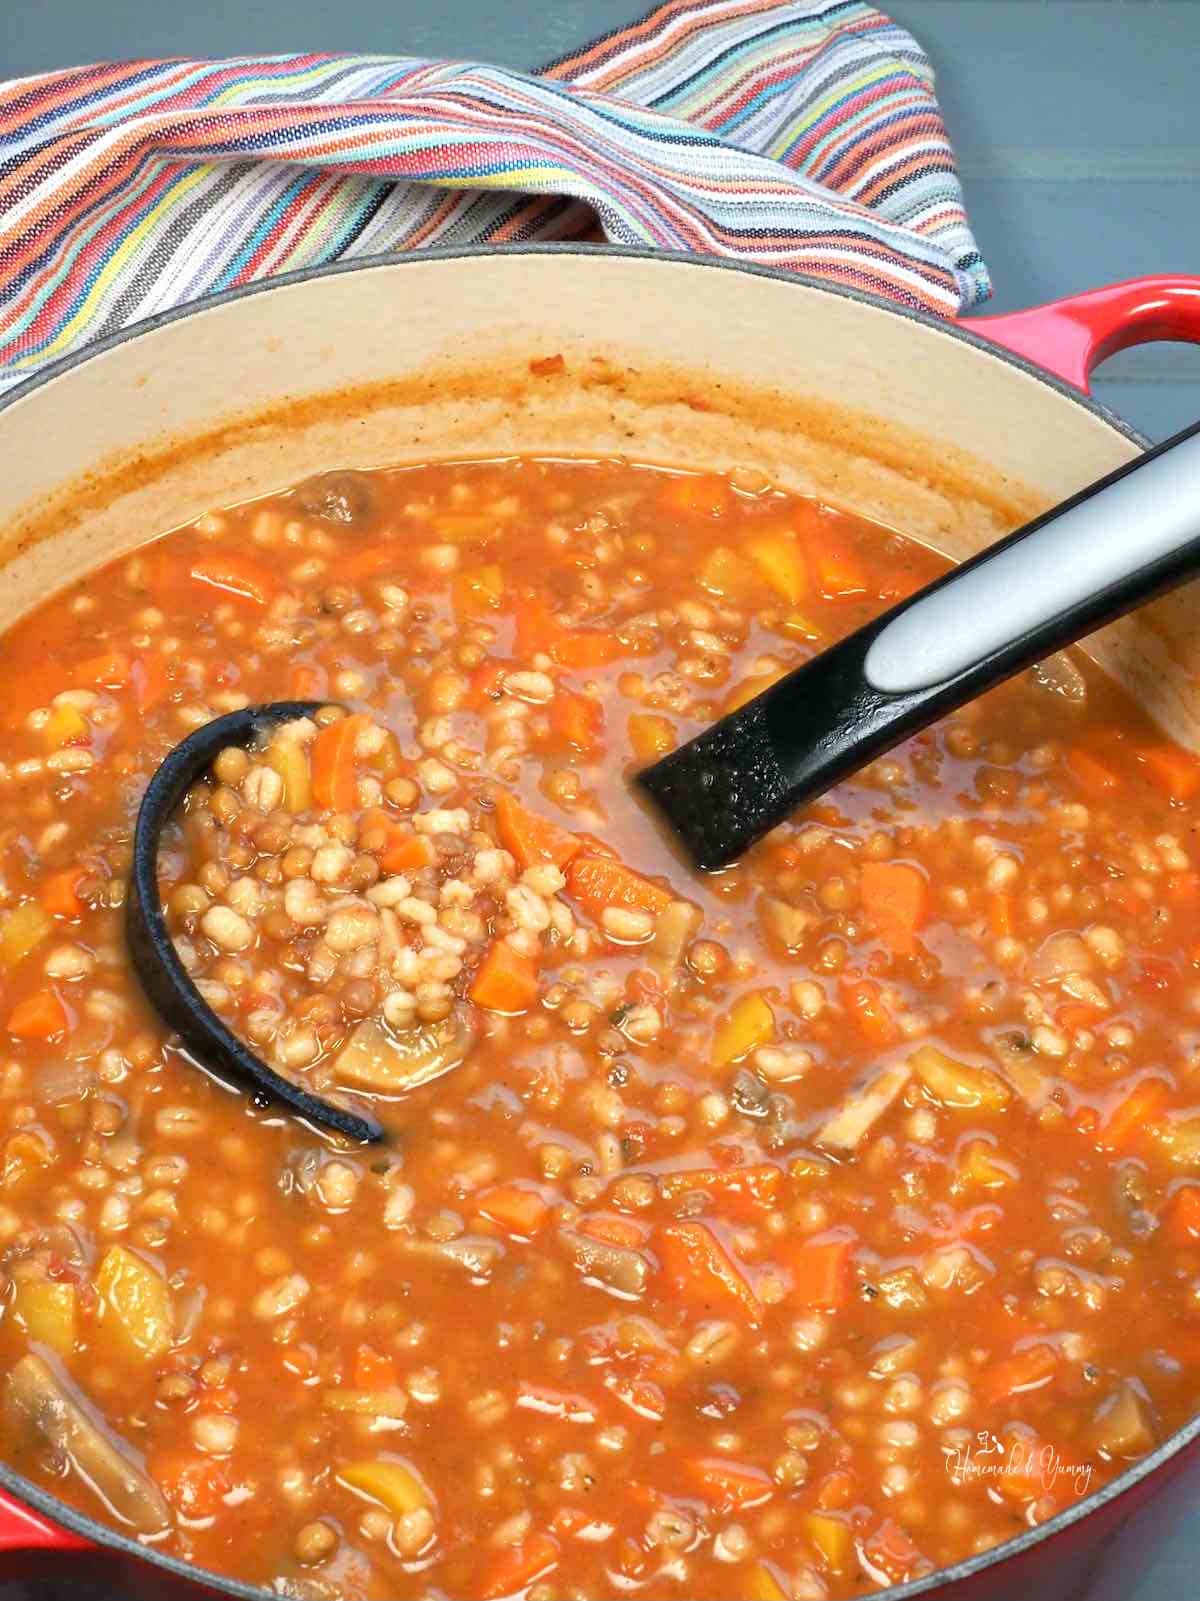 A pot of vegetable soup with lentils and barley.